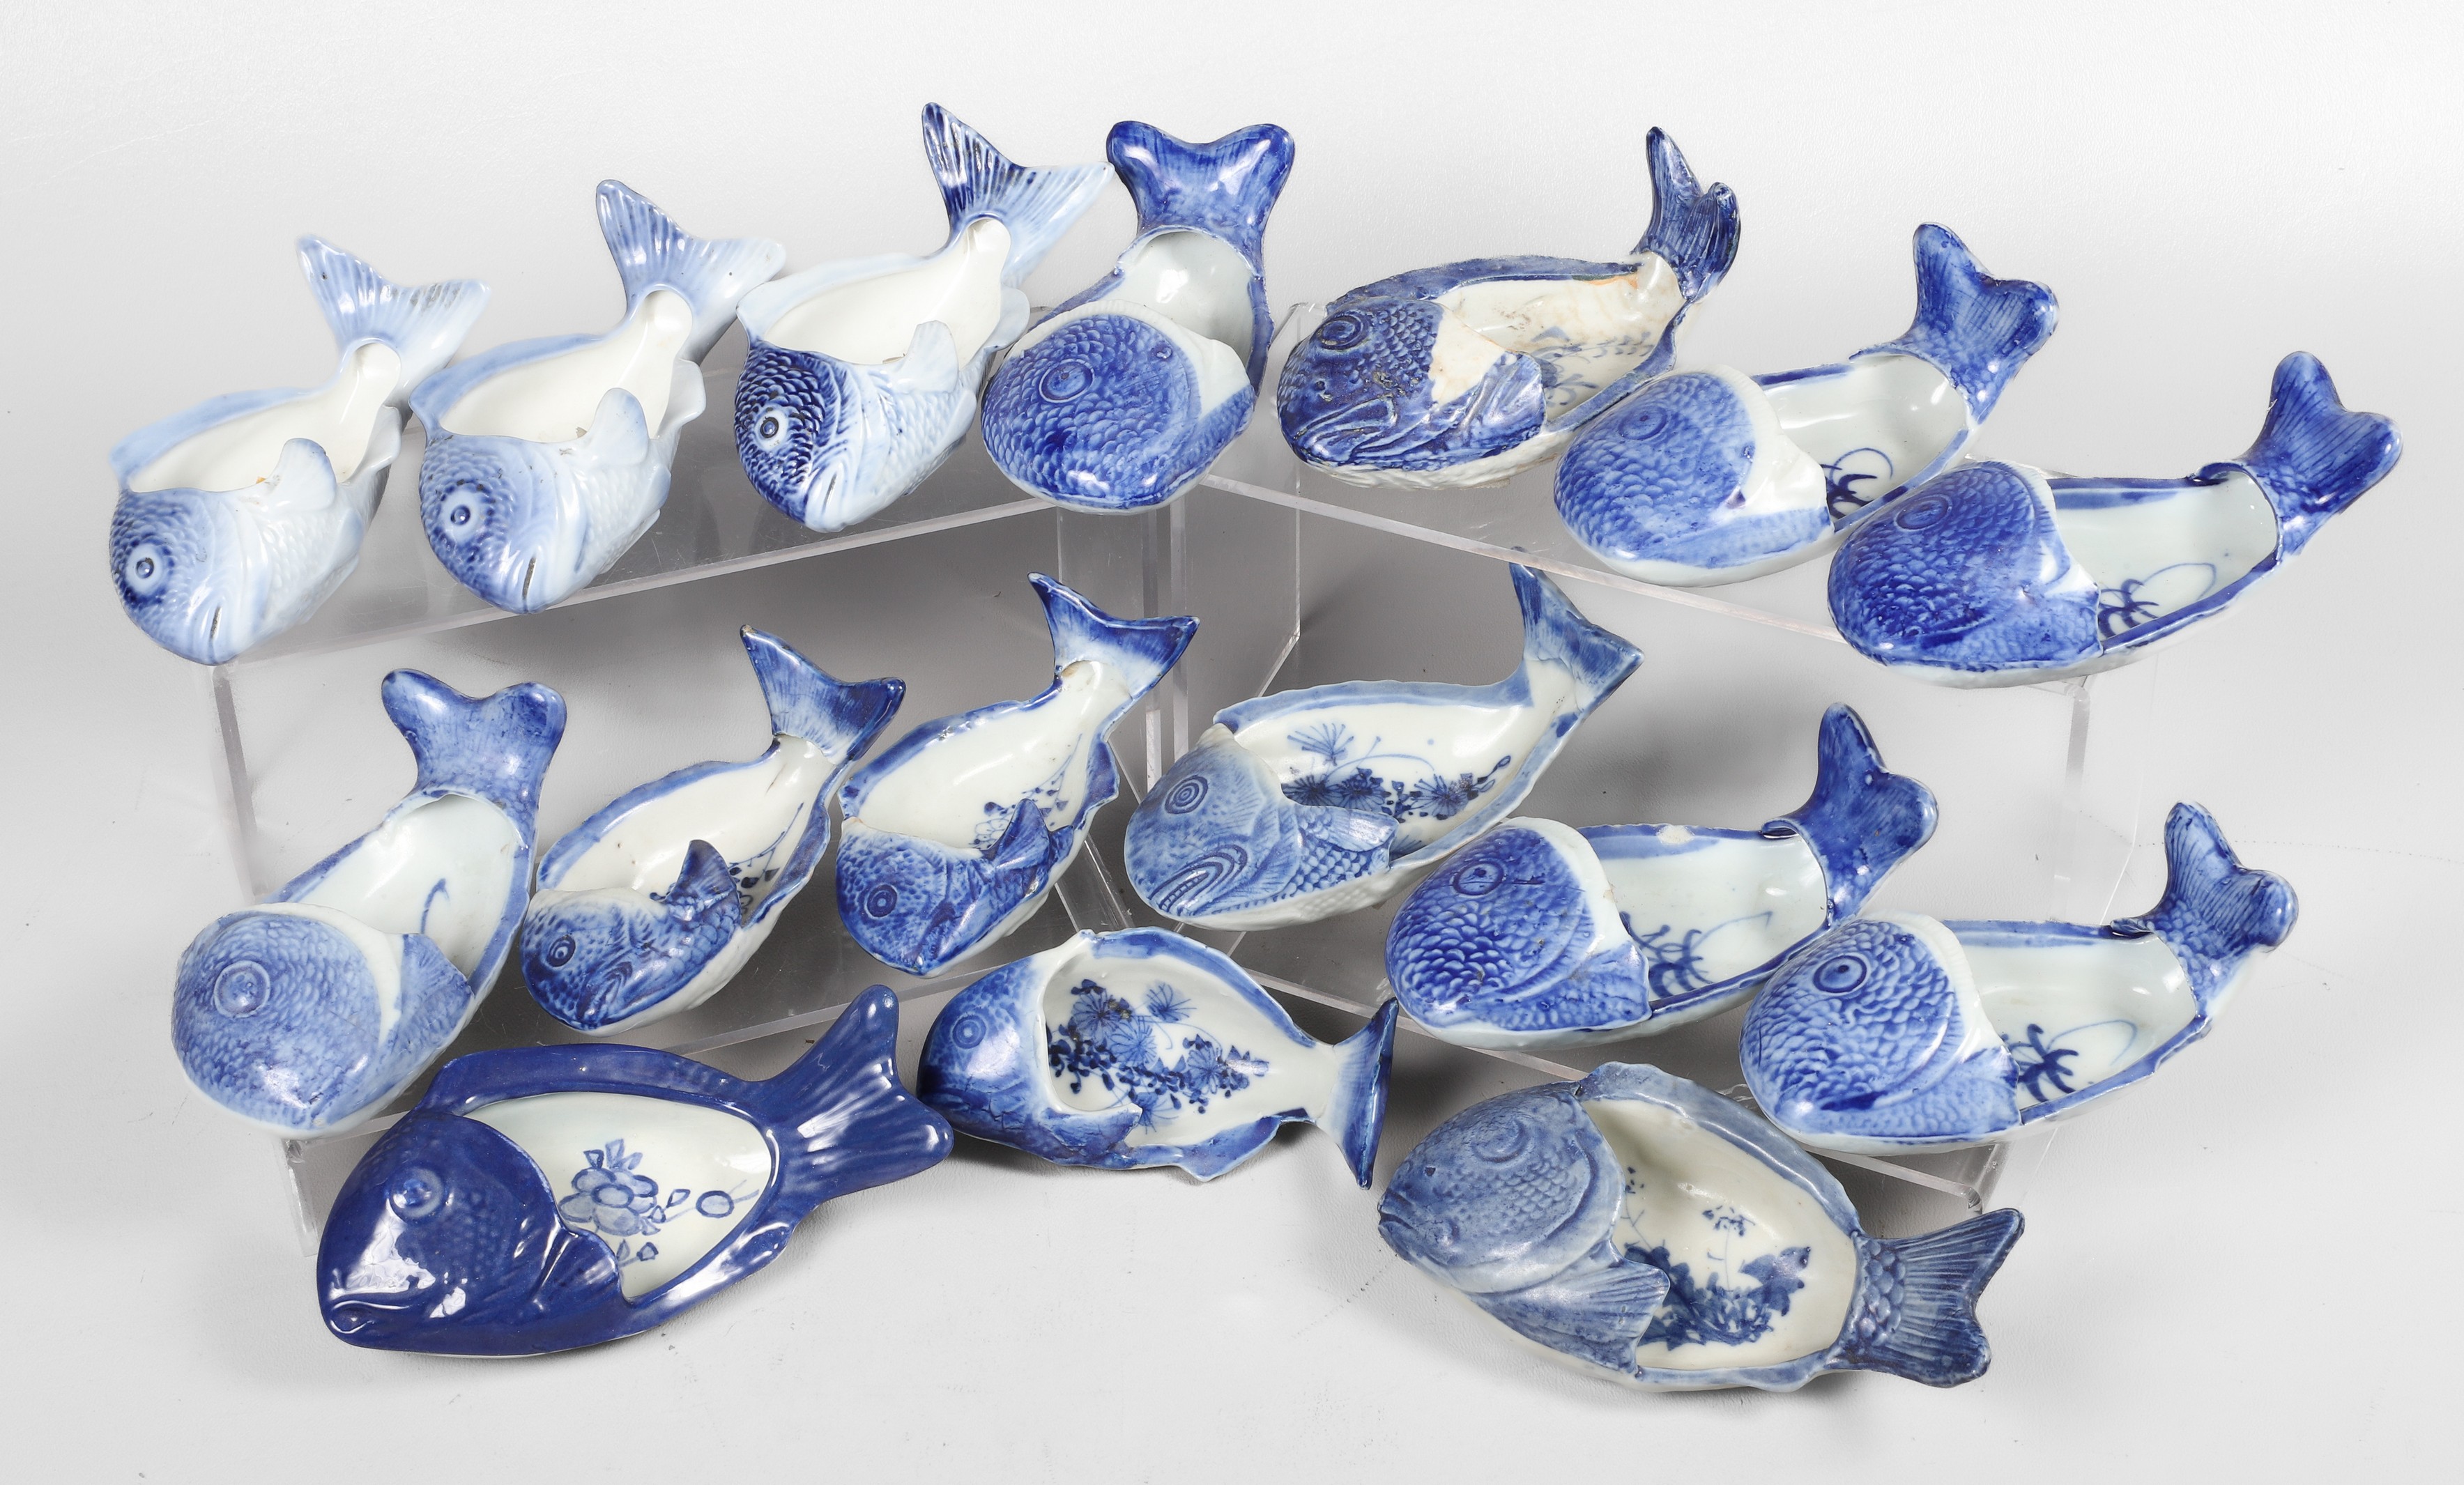  16 Chinese porcelain fish form 2e08bd